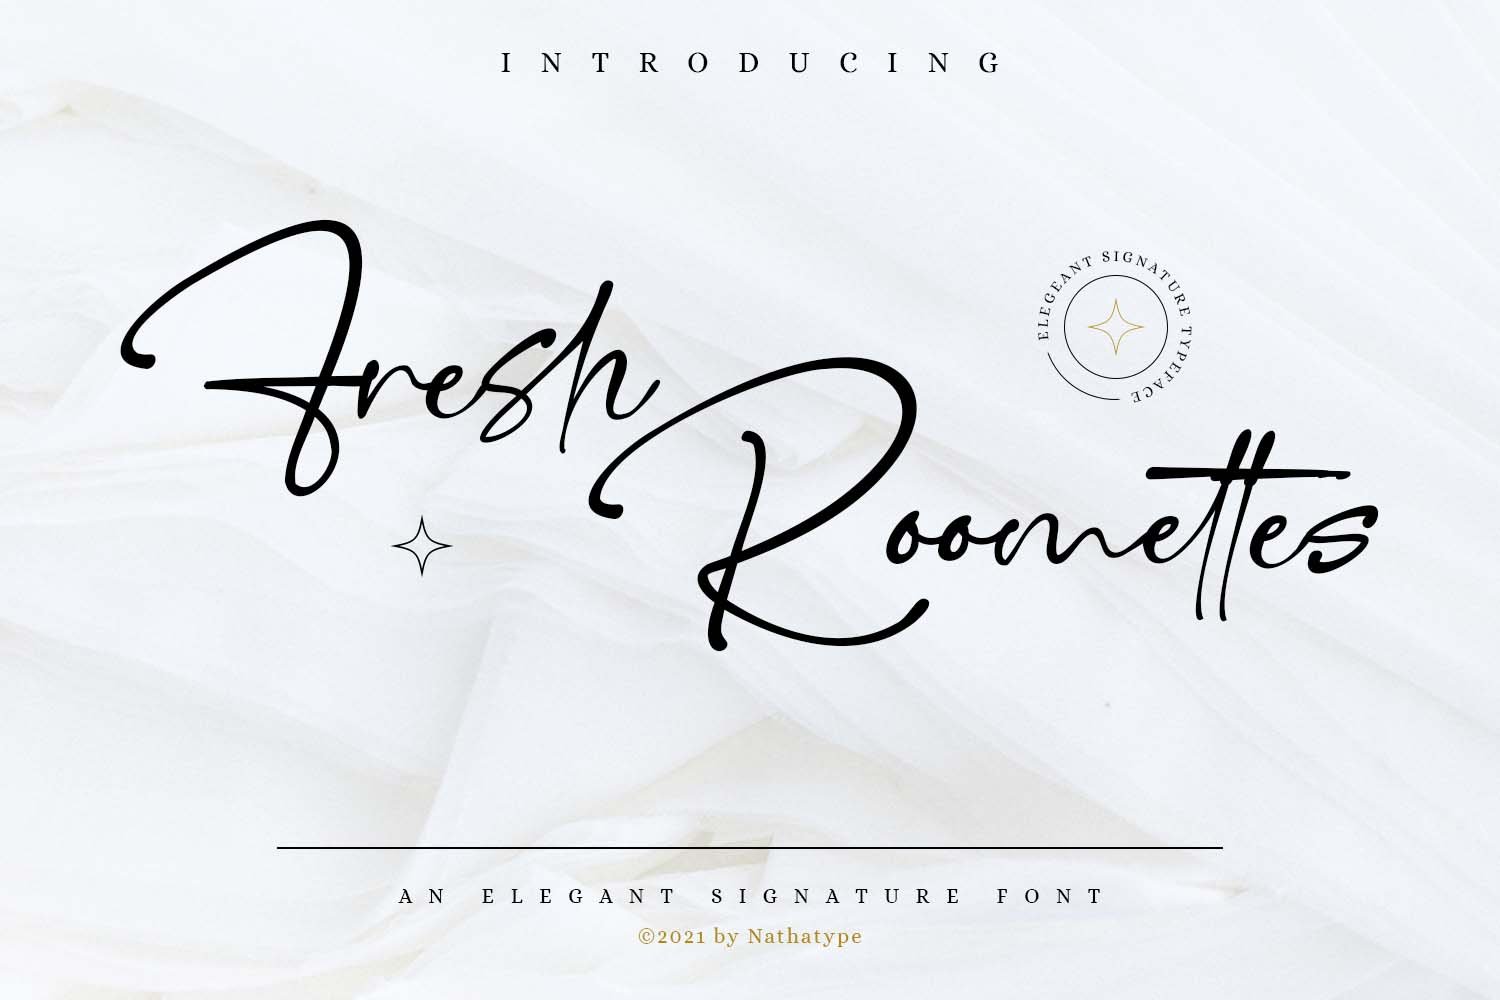 Fresh Roomettes cover image.